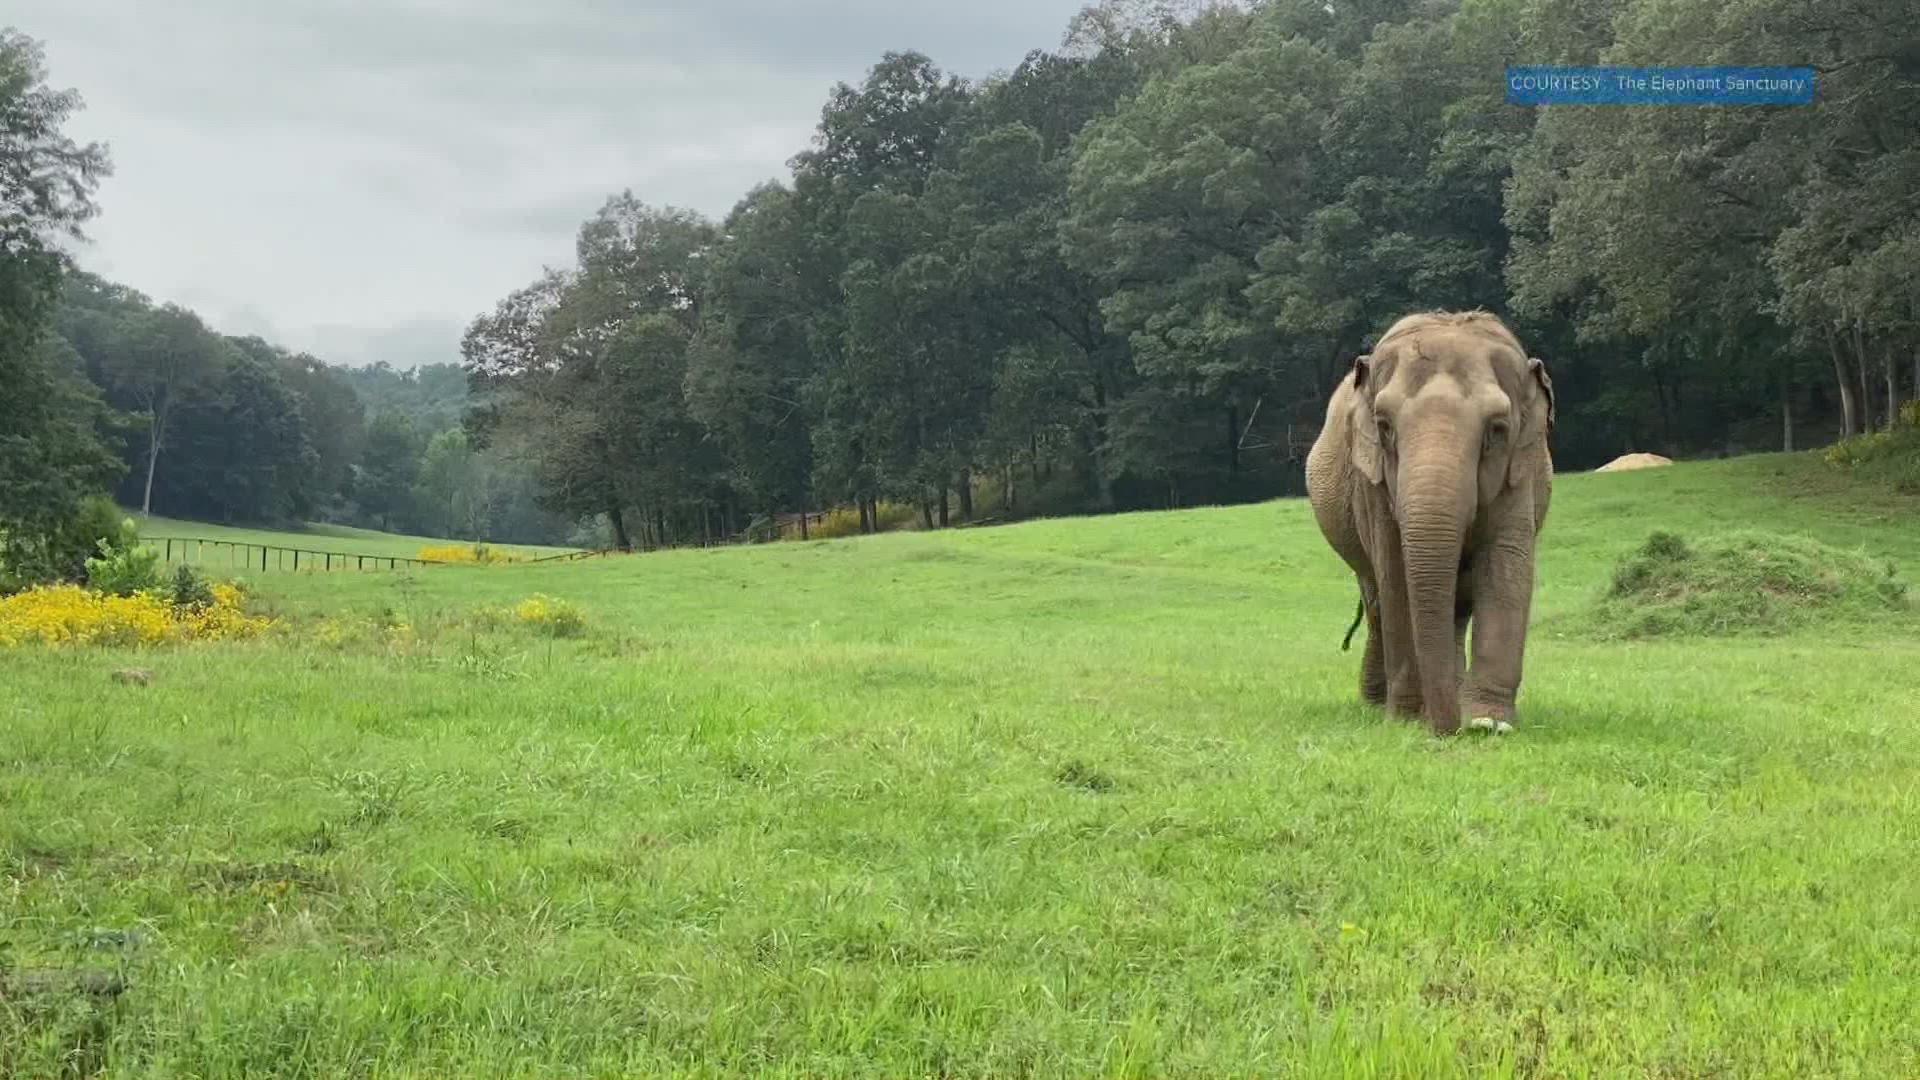 The aging elephants will trade the spotlight for 3,000 acres of refuge at the largest elephant sanctuary in the country just four hours from Knoxville.